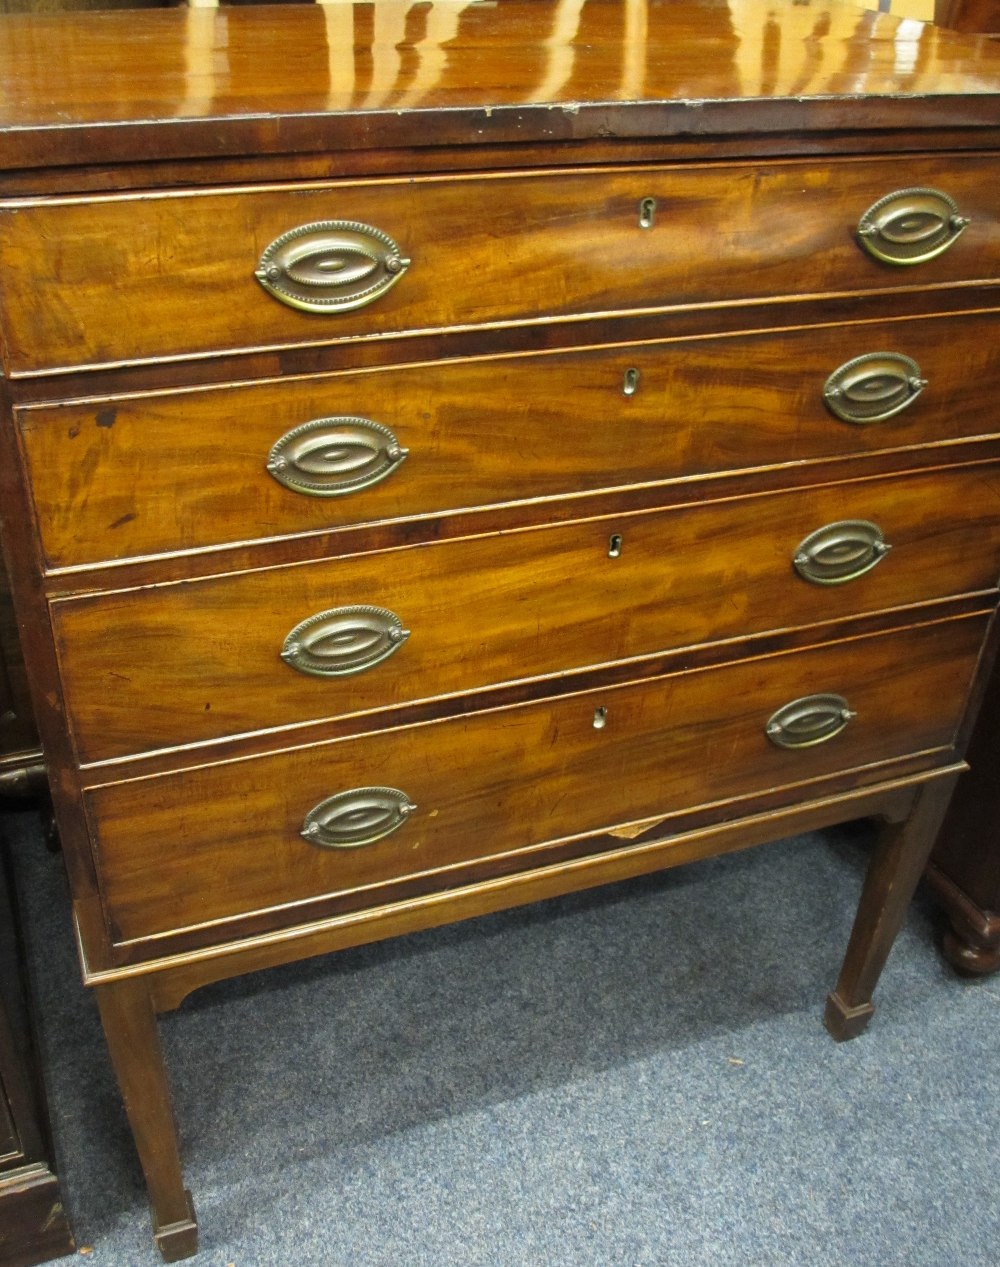 REGENCY MAHOGANY FOUR DRAWER CHEST on corner tapering supports with spade feet, the oak lined